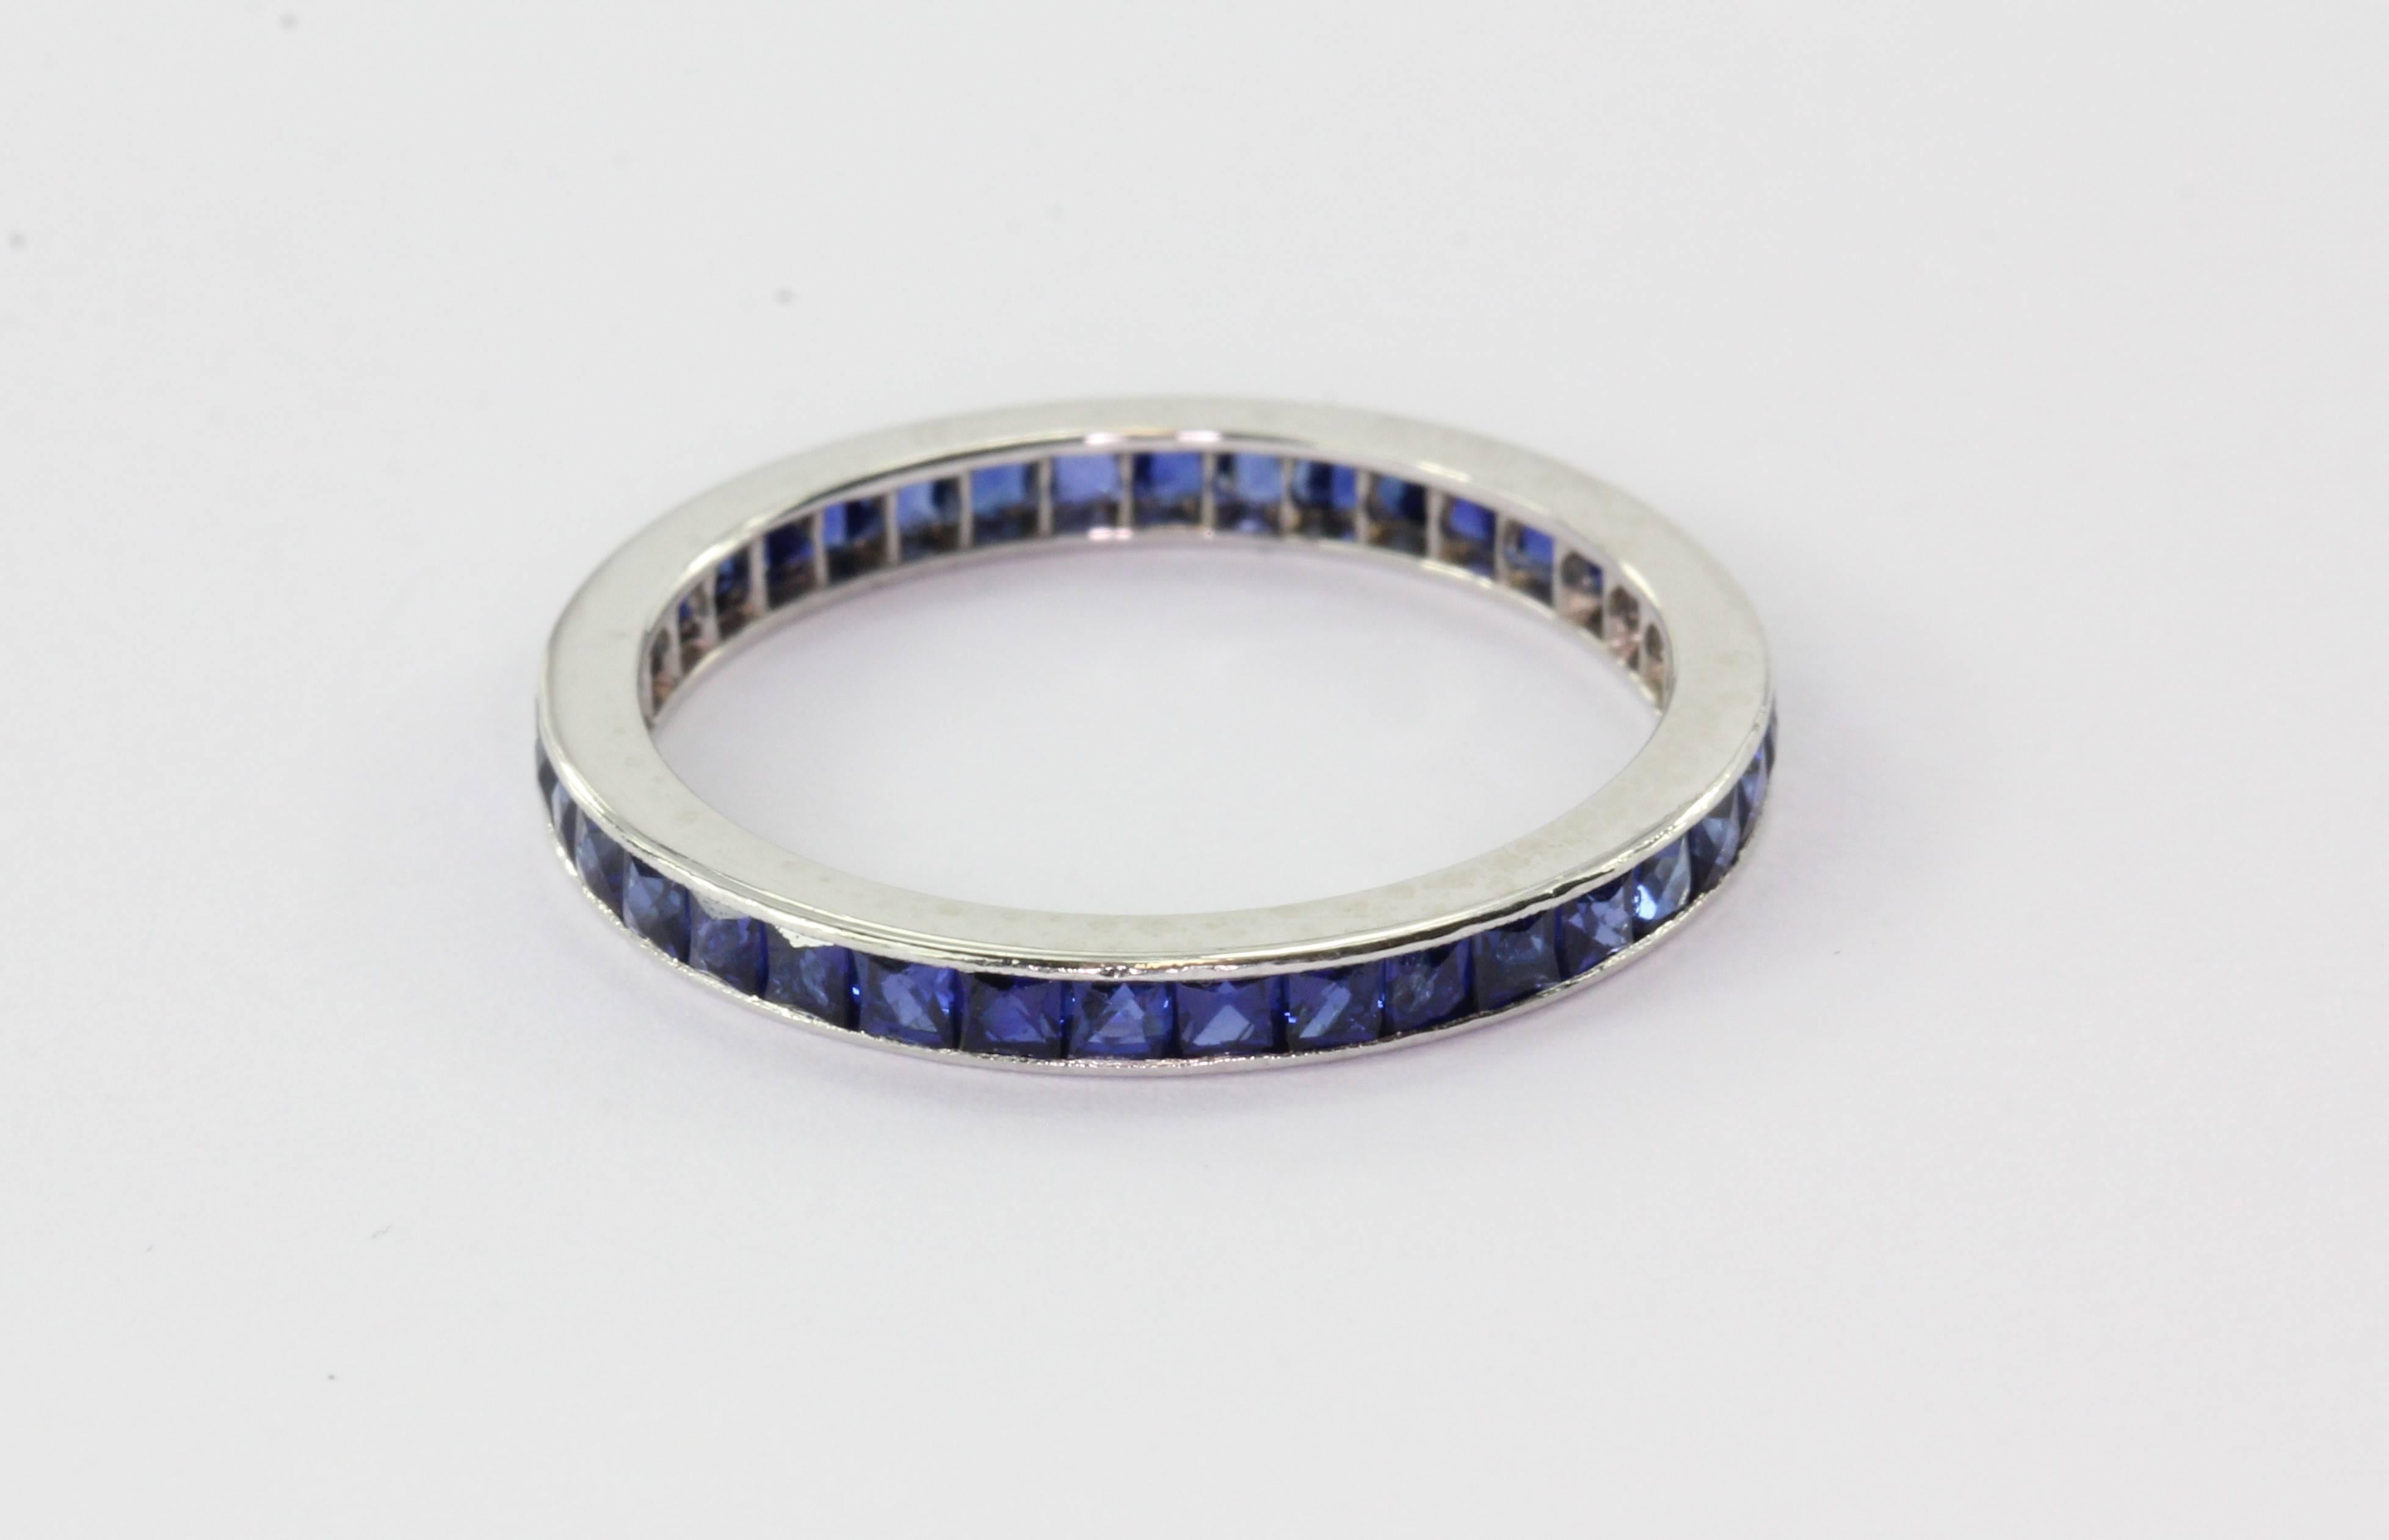 Platinum Art Deco French Cut Sapphire Eternity Band Size 5.75. The ring is in excellent estate condition and ready to wear. The piece is set with 35 French cut blue sapphires that come to approximately 1 carat total. The ring is a size 5.75, it